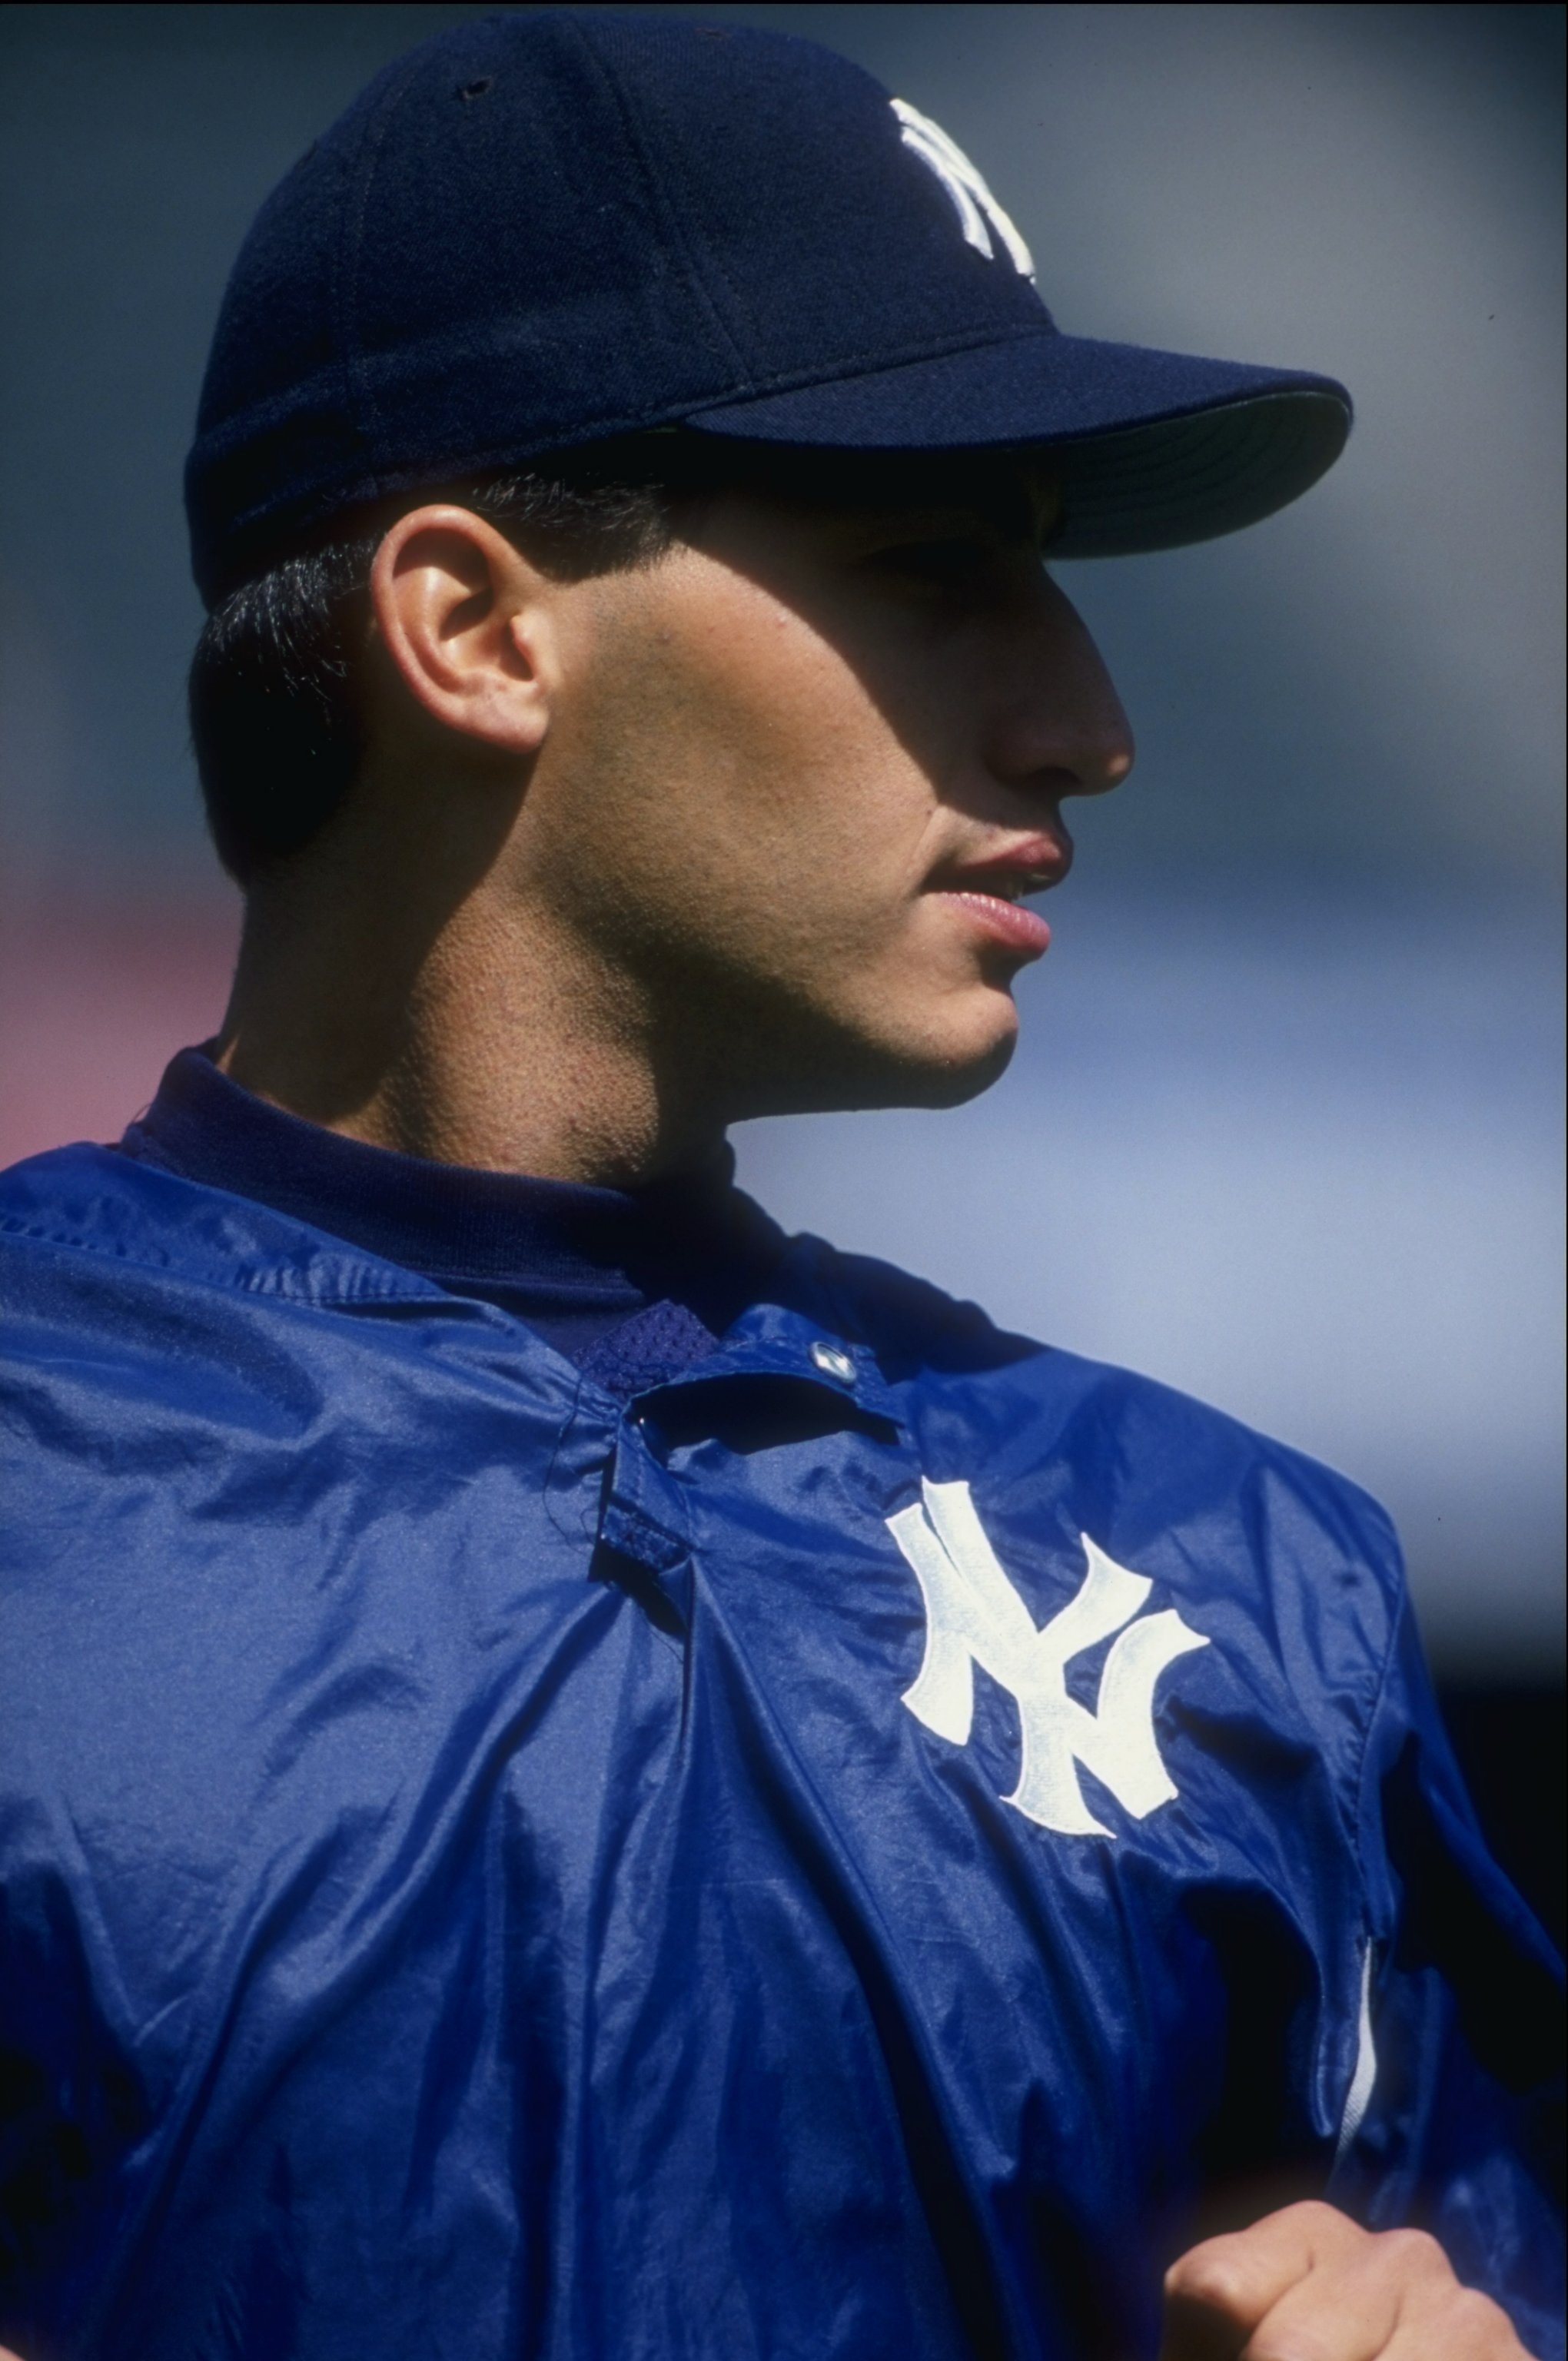 5 Apr 1997: Andy Pettitte #46 of the New York Yankees looks on during a game against the Oakland Athletics at the Oakland Coliseum in Oakland, California. The Athletics defeated the Yankees 3-0.